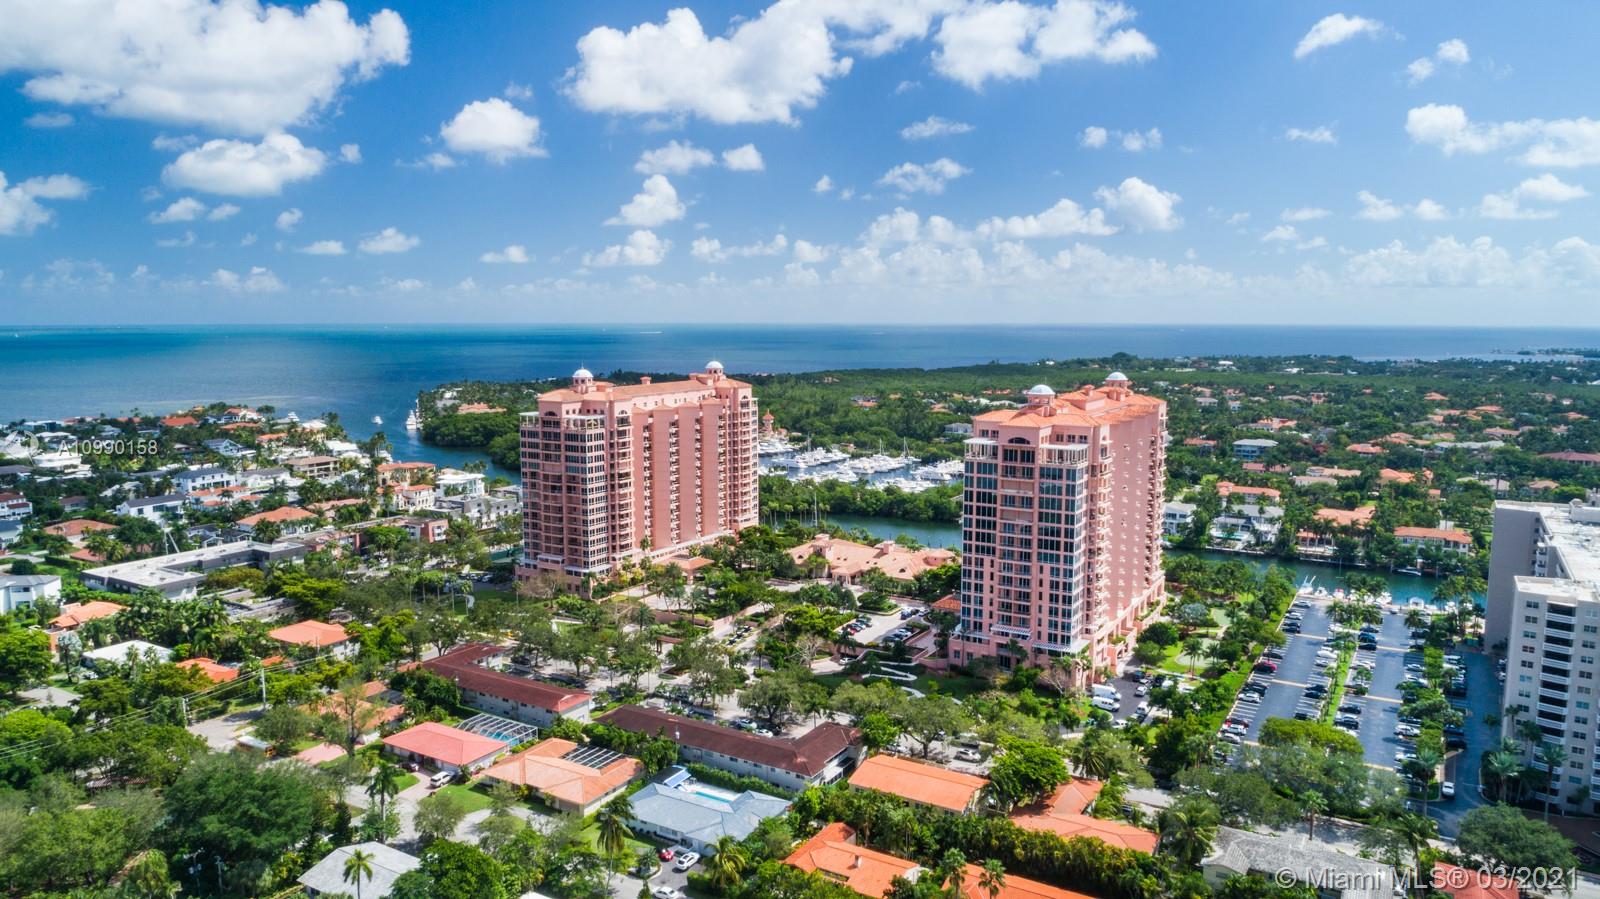 Gables Club 10-60 Edgewater Drive, Coral Gables, FL 33133 | Condos for sale  and rent in Miami Florida | MONDIAL International Realty